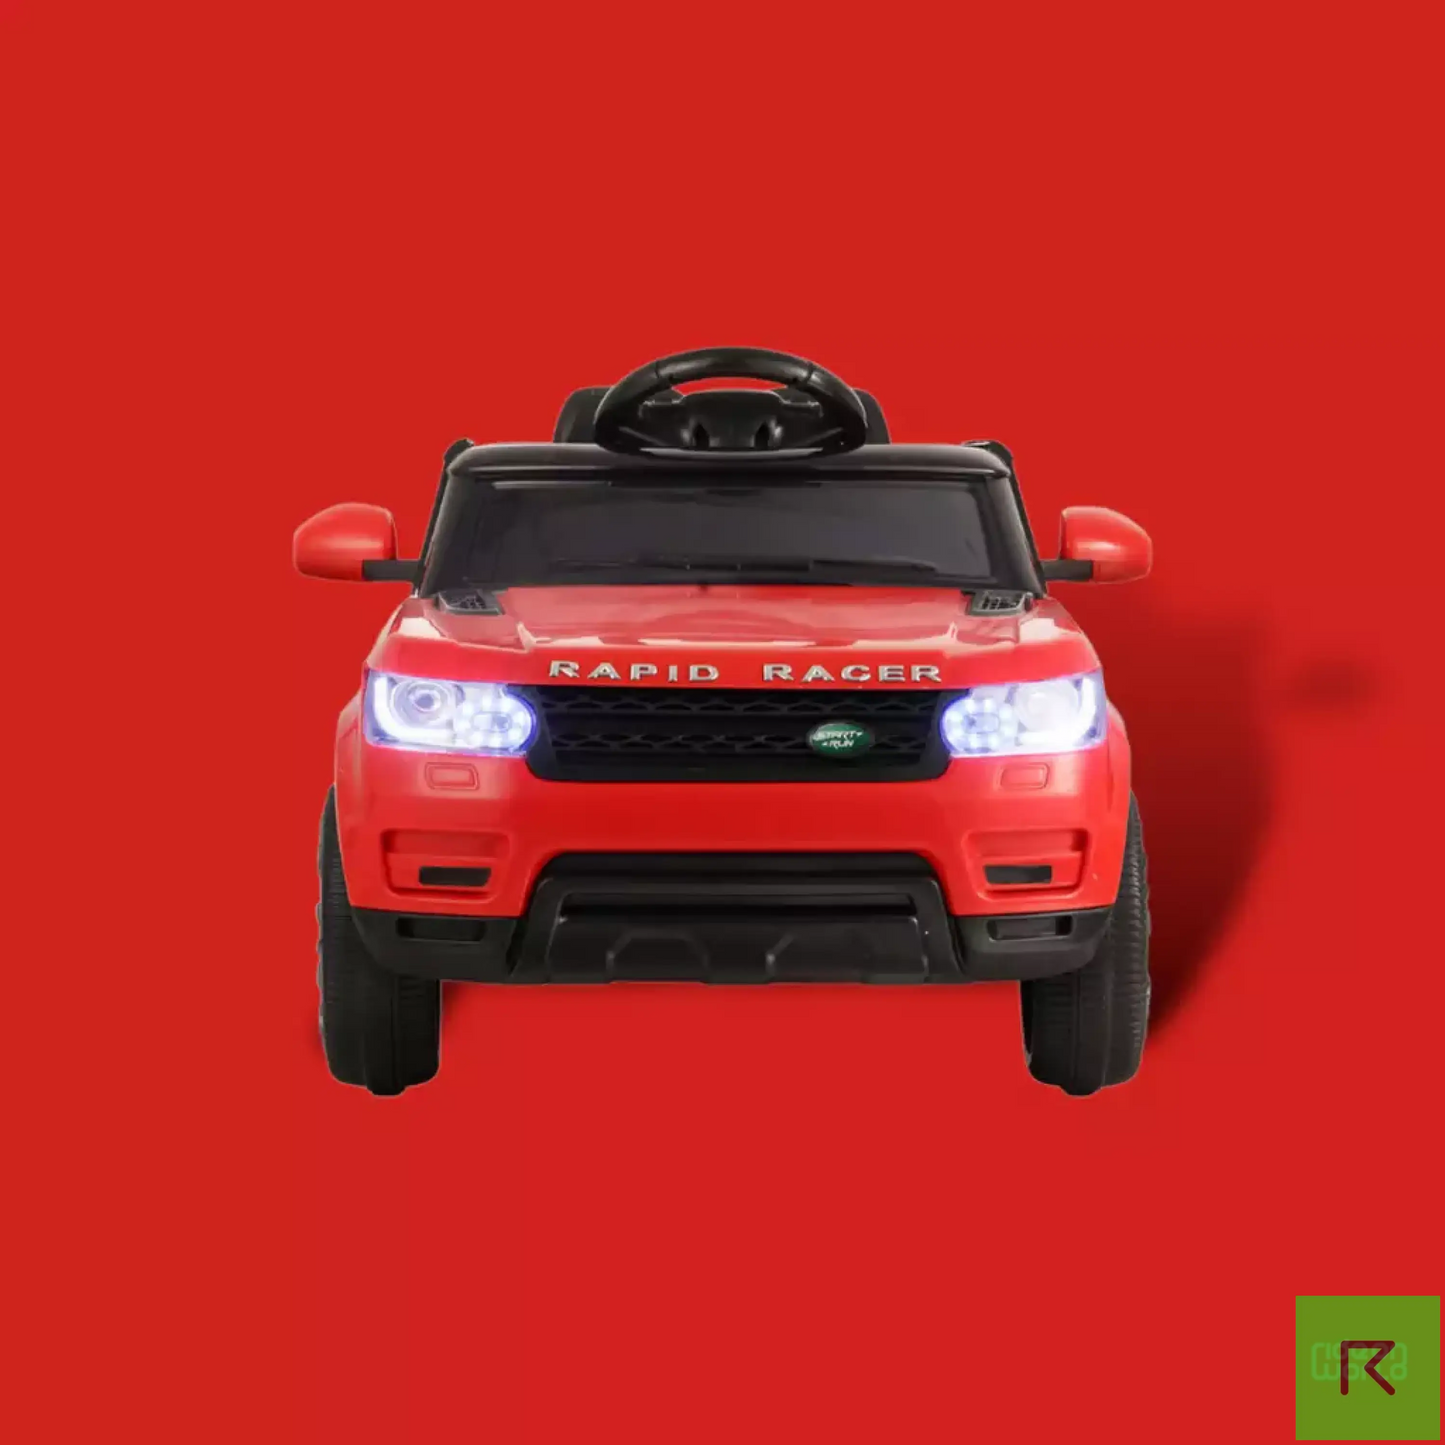 RANGE ROVER RED kids ride on electric car